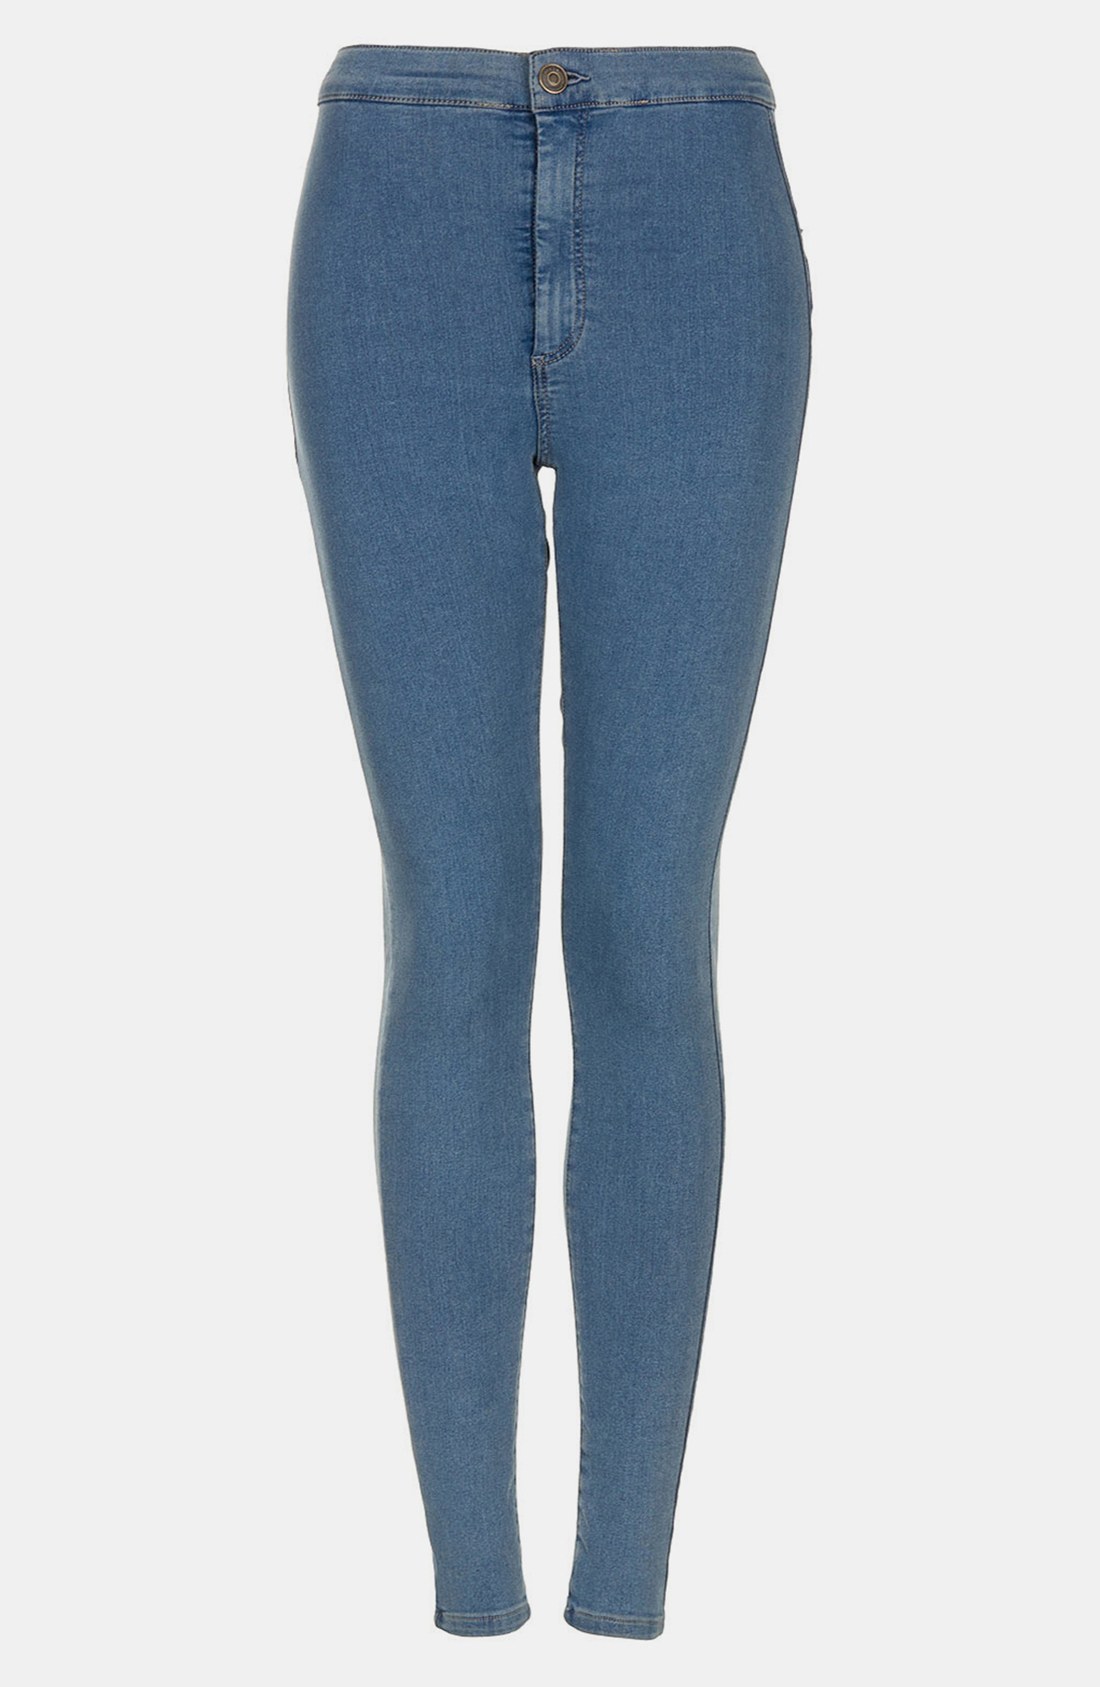 Topshop Moto Vintage Joni High Waisted Skinny Crop Jeans Mid Stone in ...